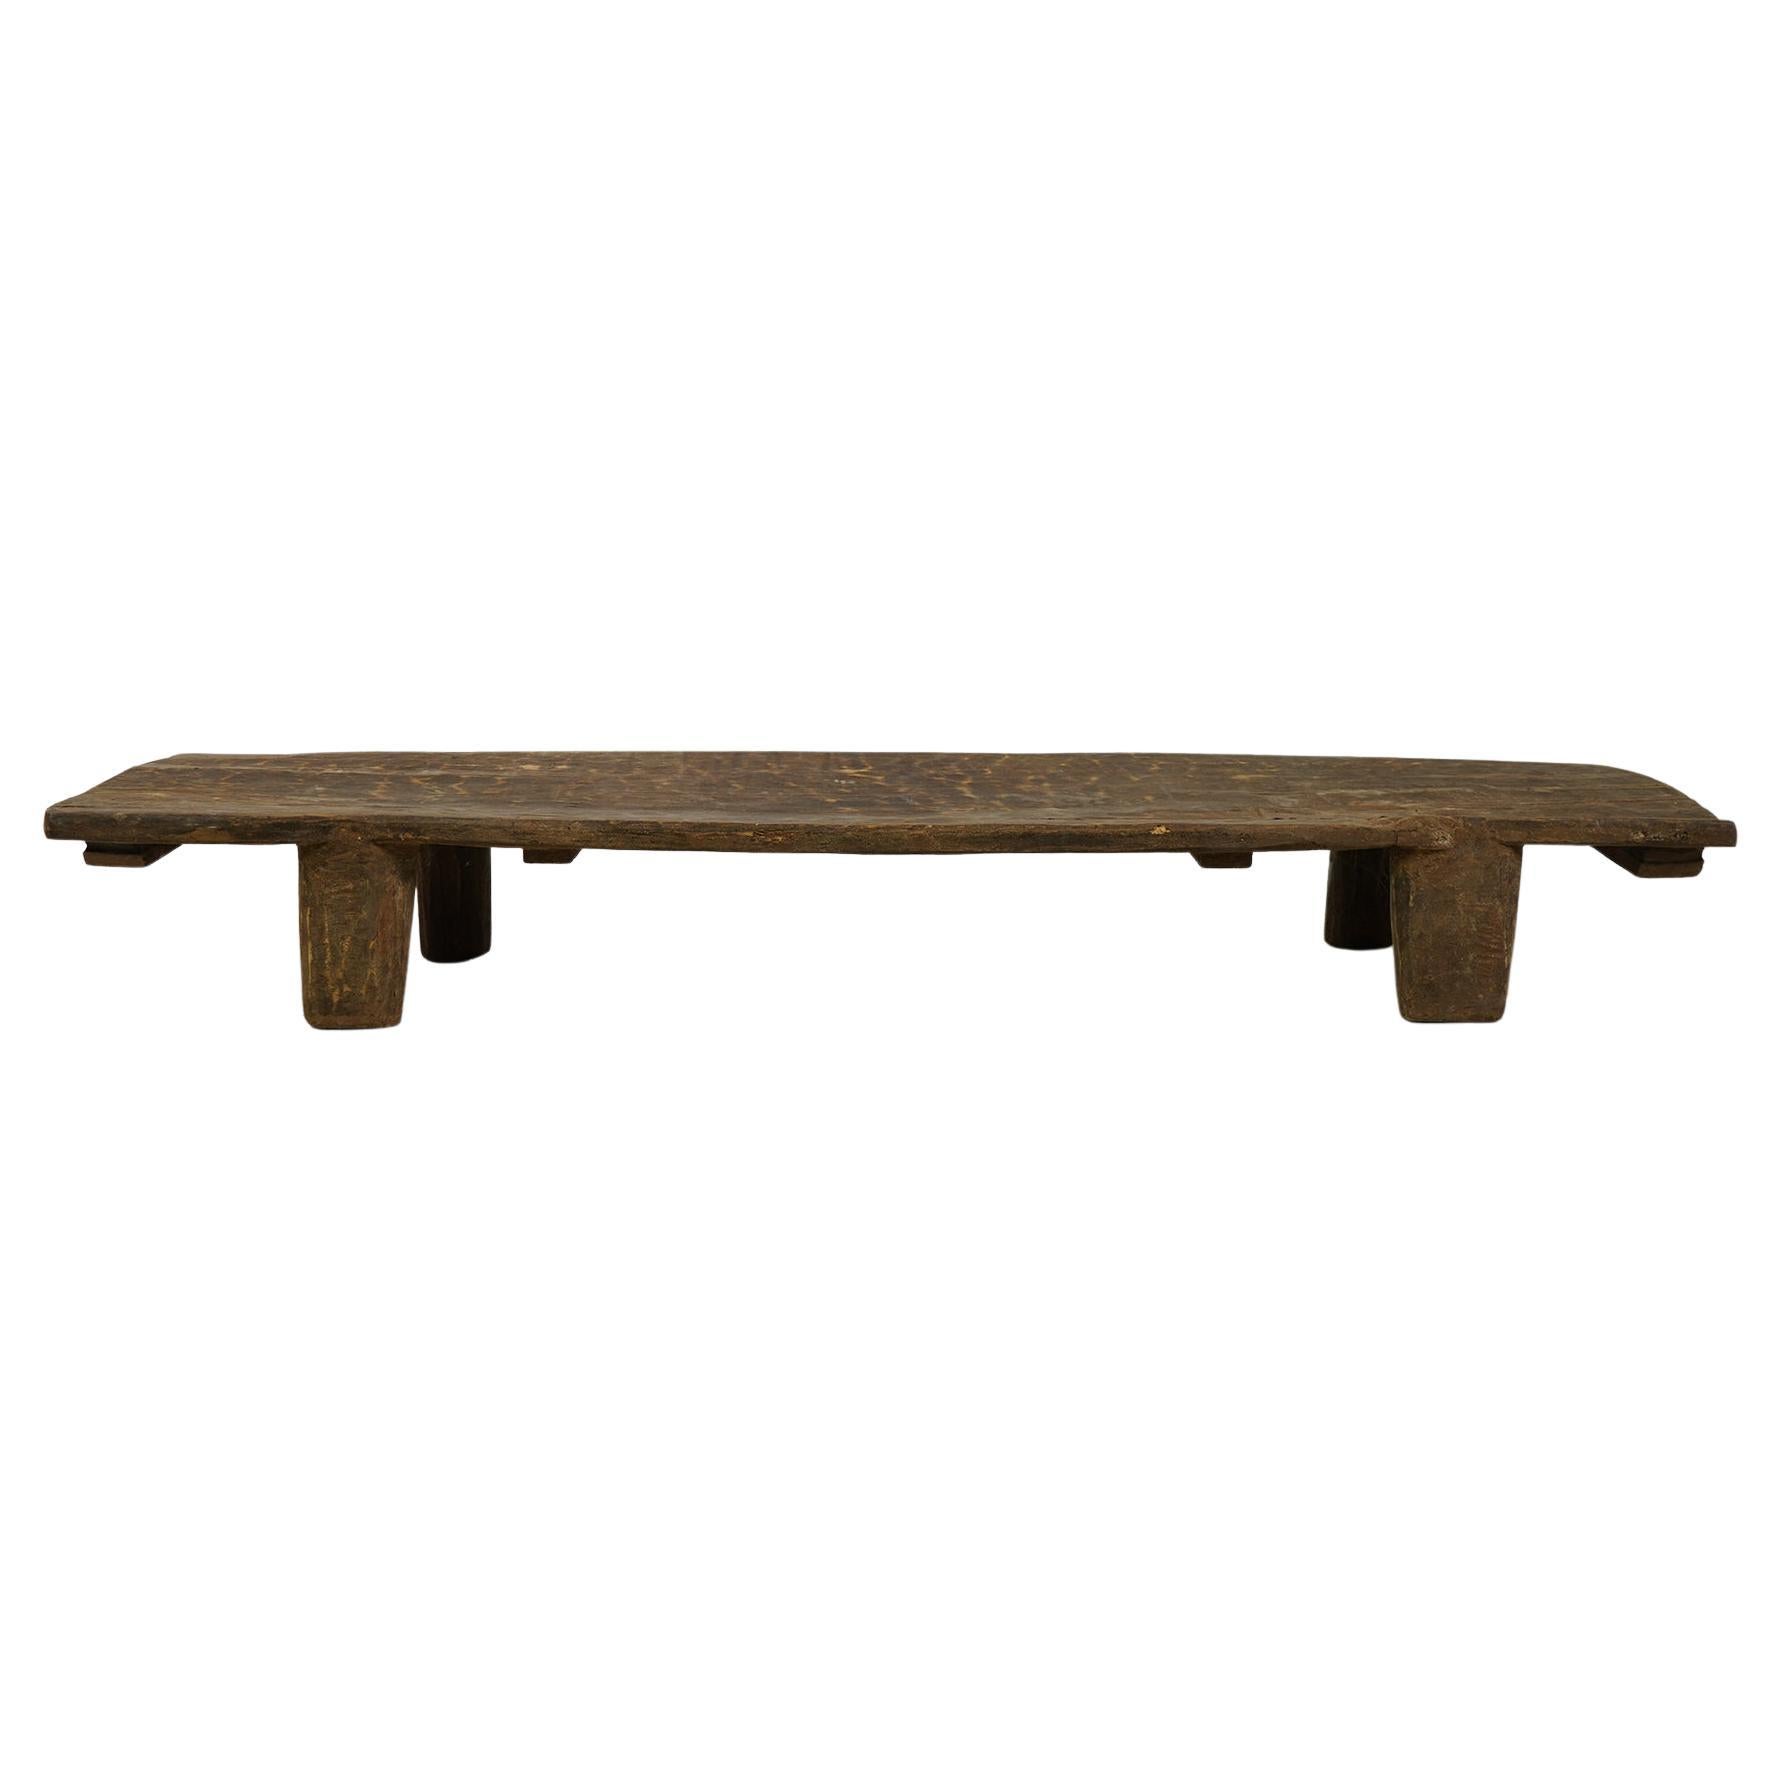 Rustic Naga Table or Bench, Hand Carved Wabi Sabi Style, Ancient Wood 'A' For Sale